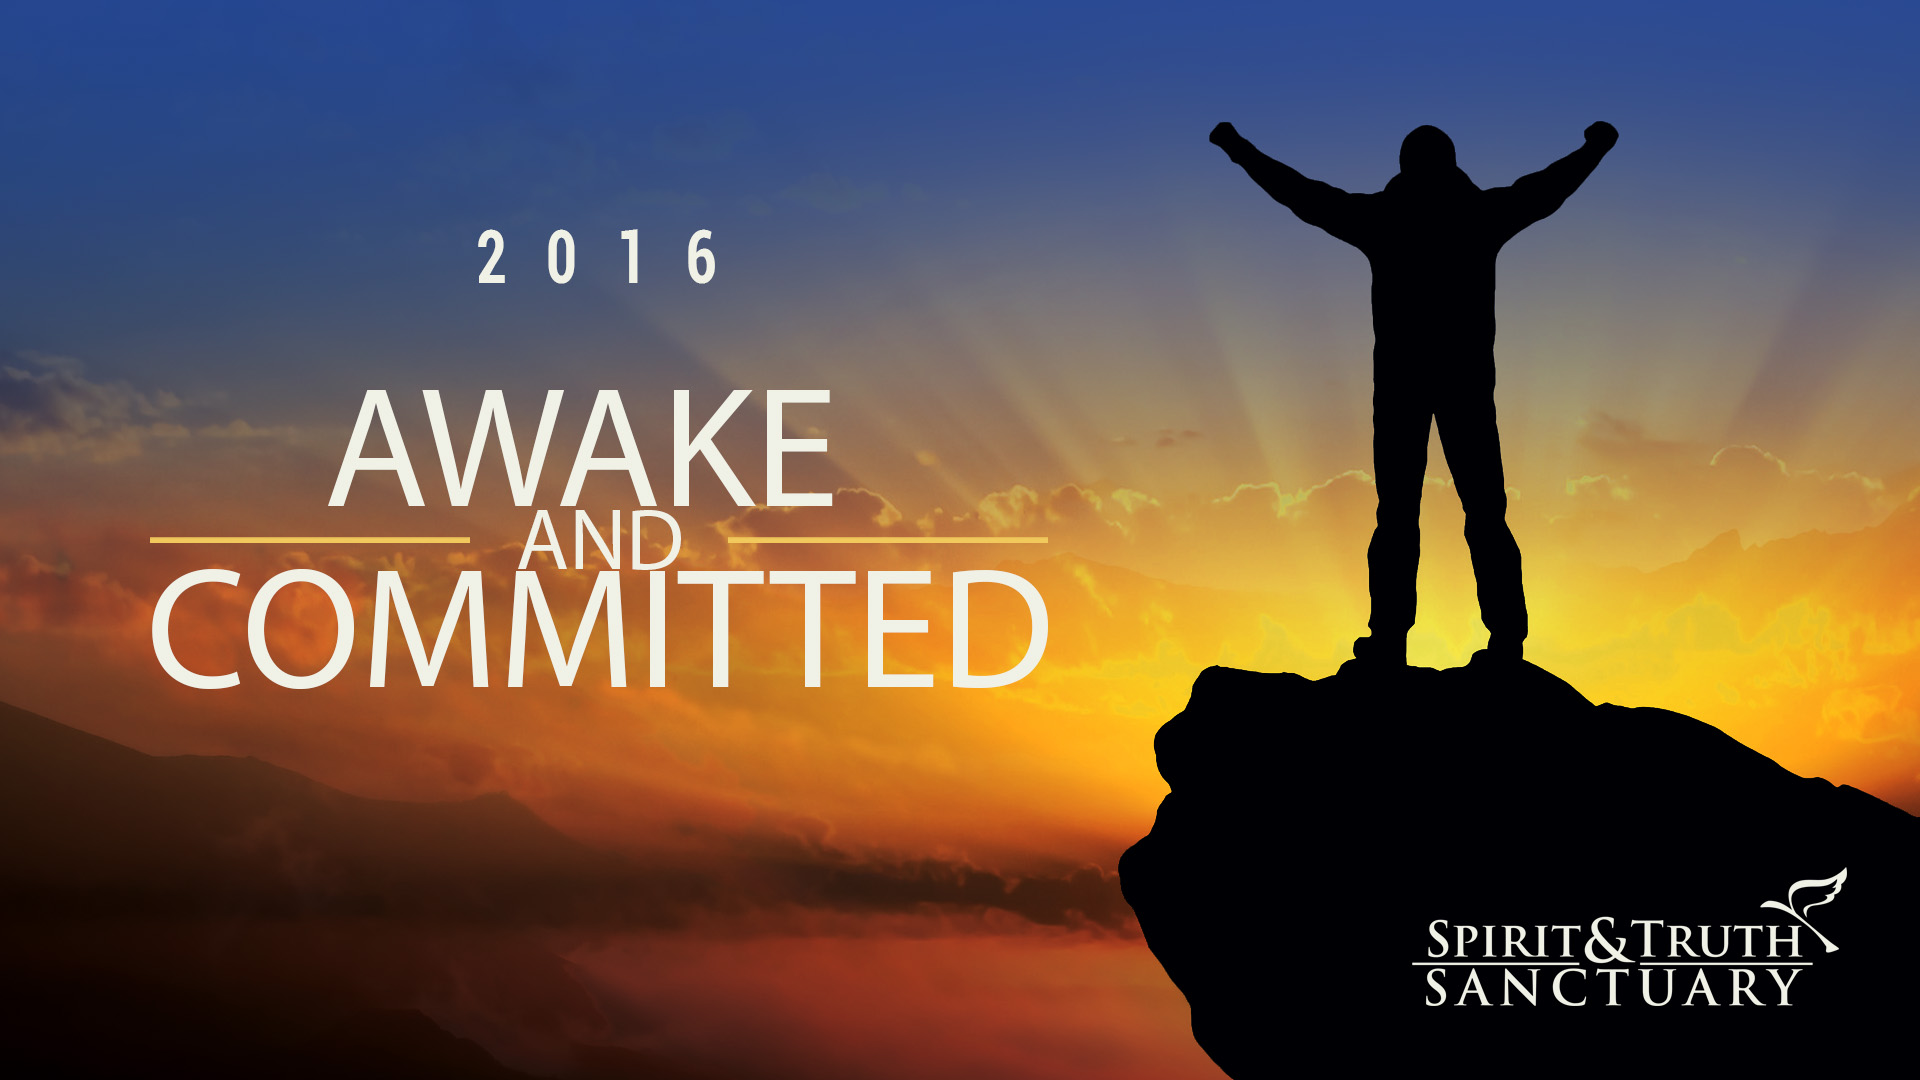 2016 Awake and Committed